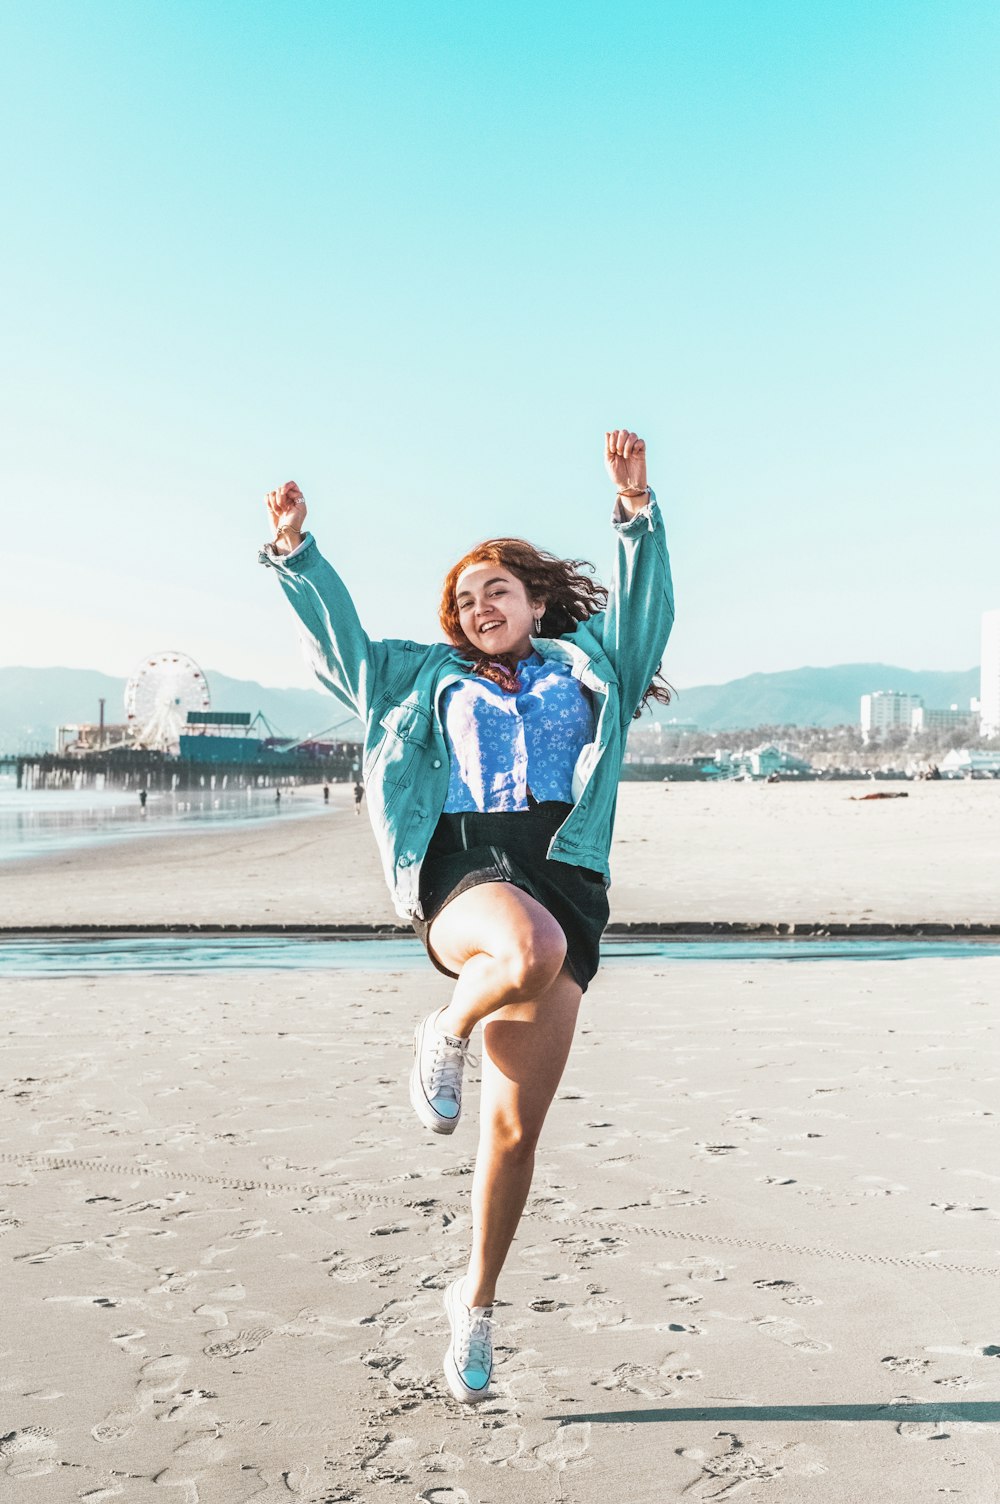 woman in blue jacket and black shorts jumping on beach during daytime